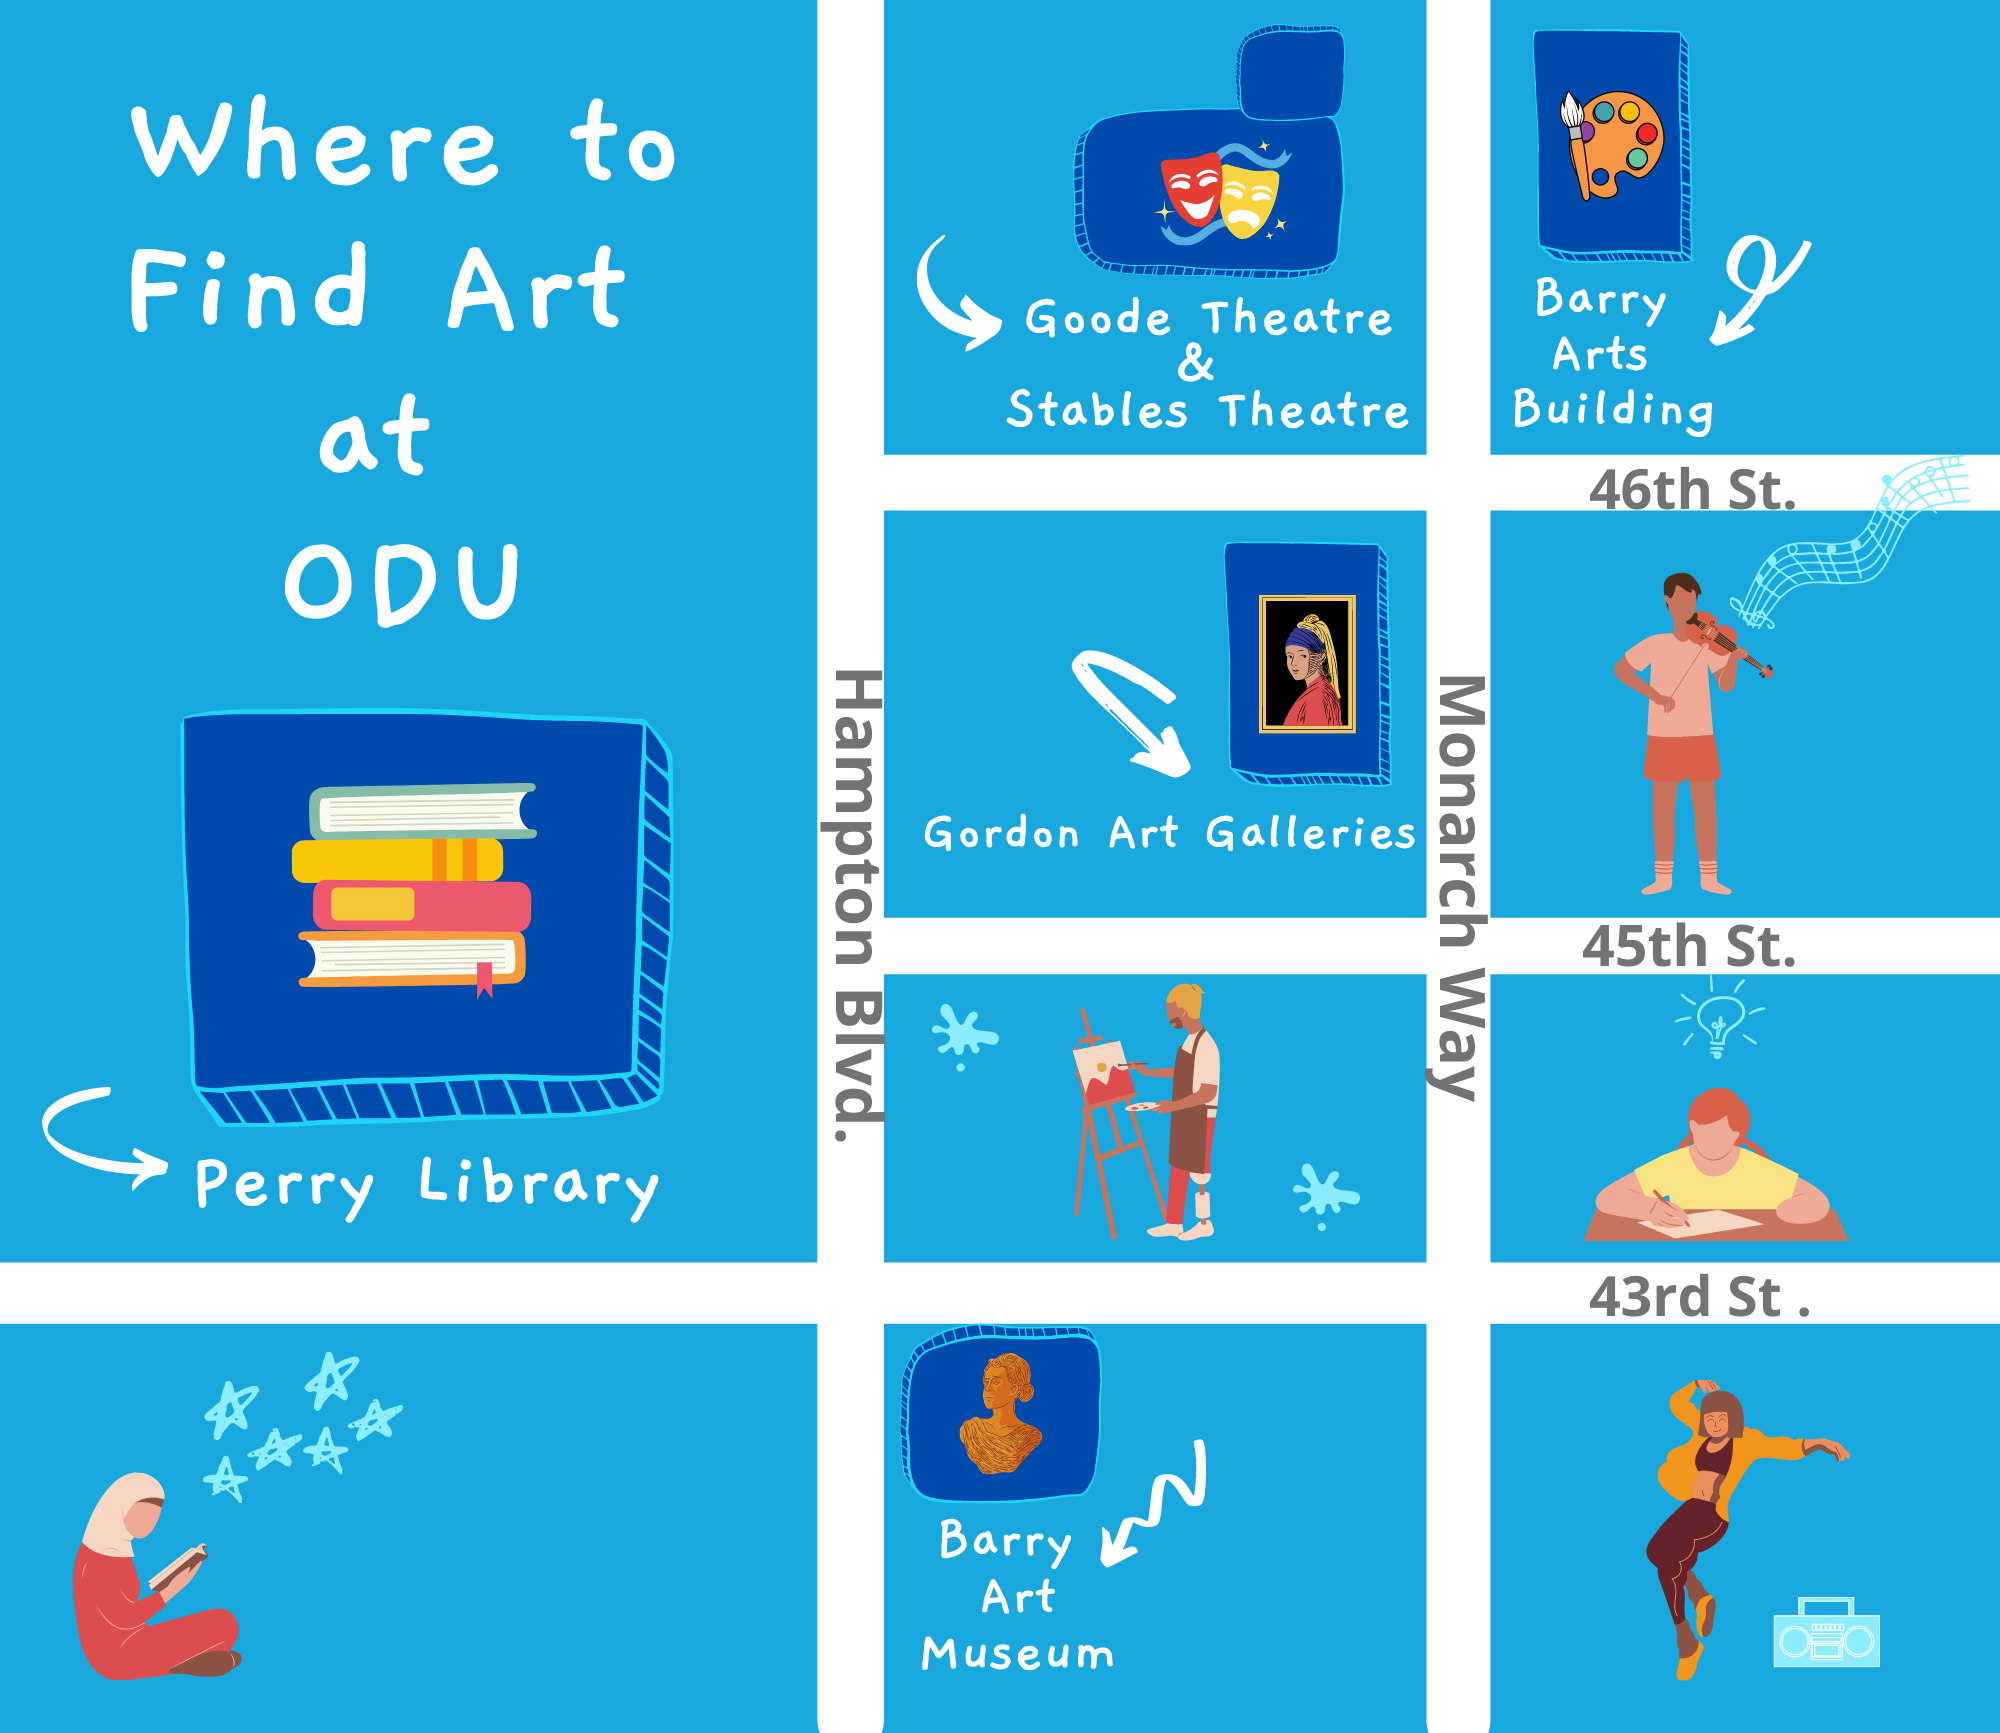 Where to Find Art at ODU Map